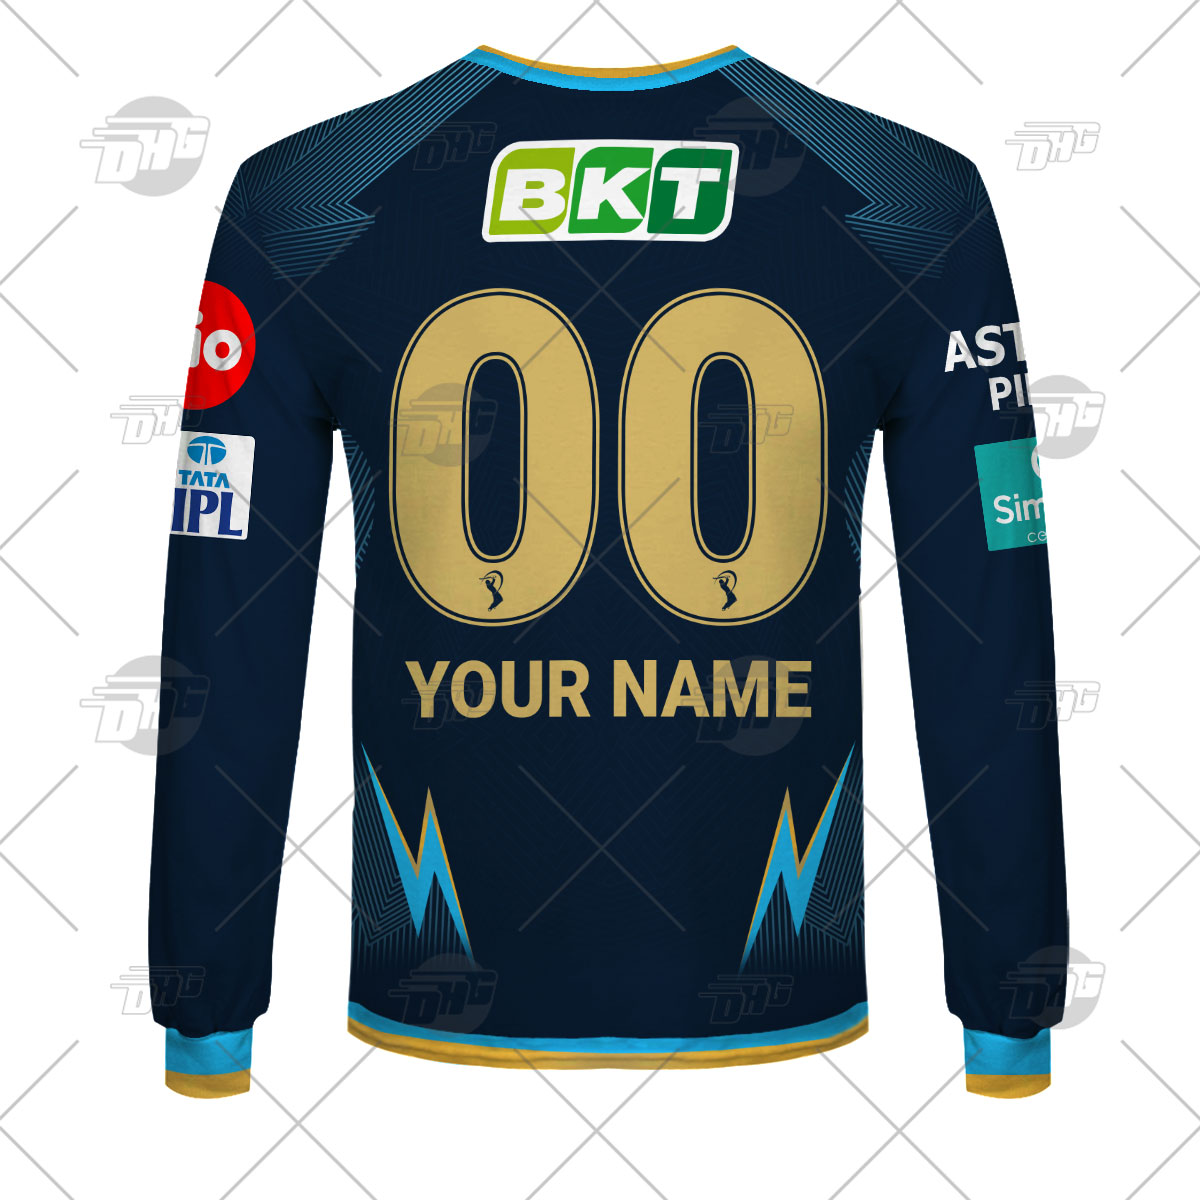 Personalised IPL Rajasthan Royals T20 Cricket India 2022 Polo Jersey -  WanderGears